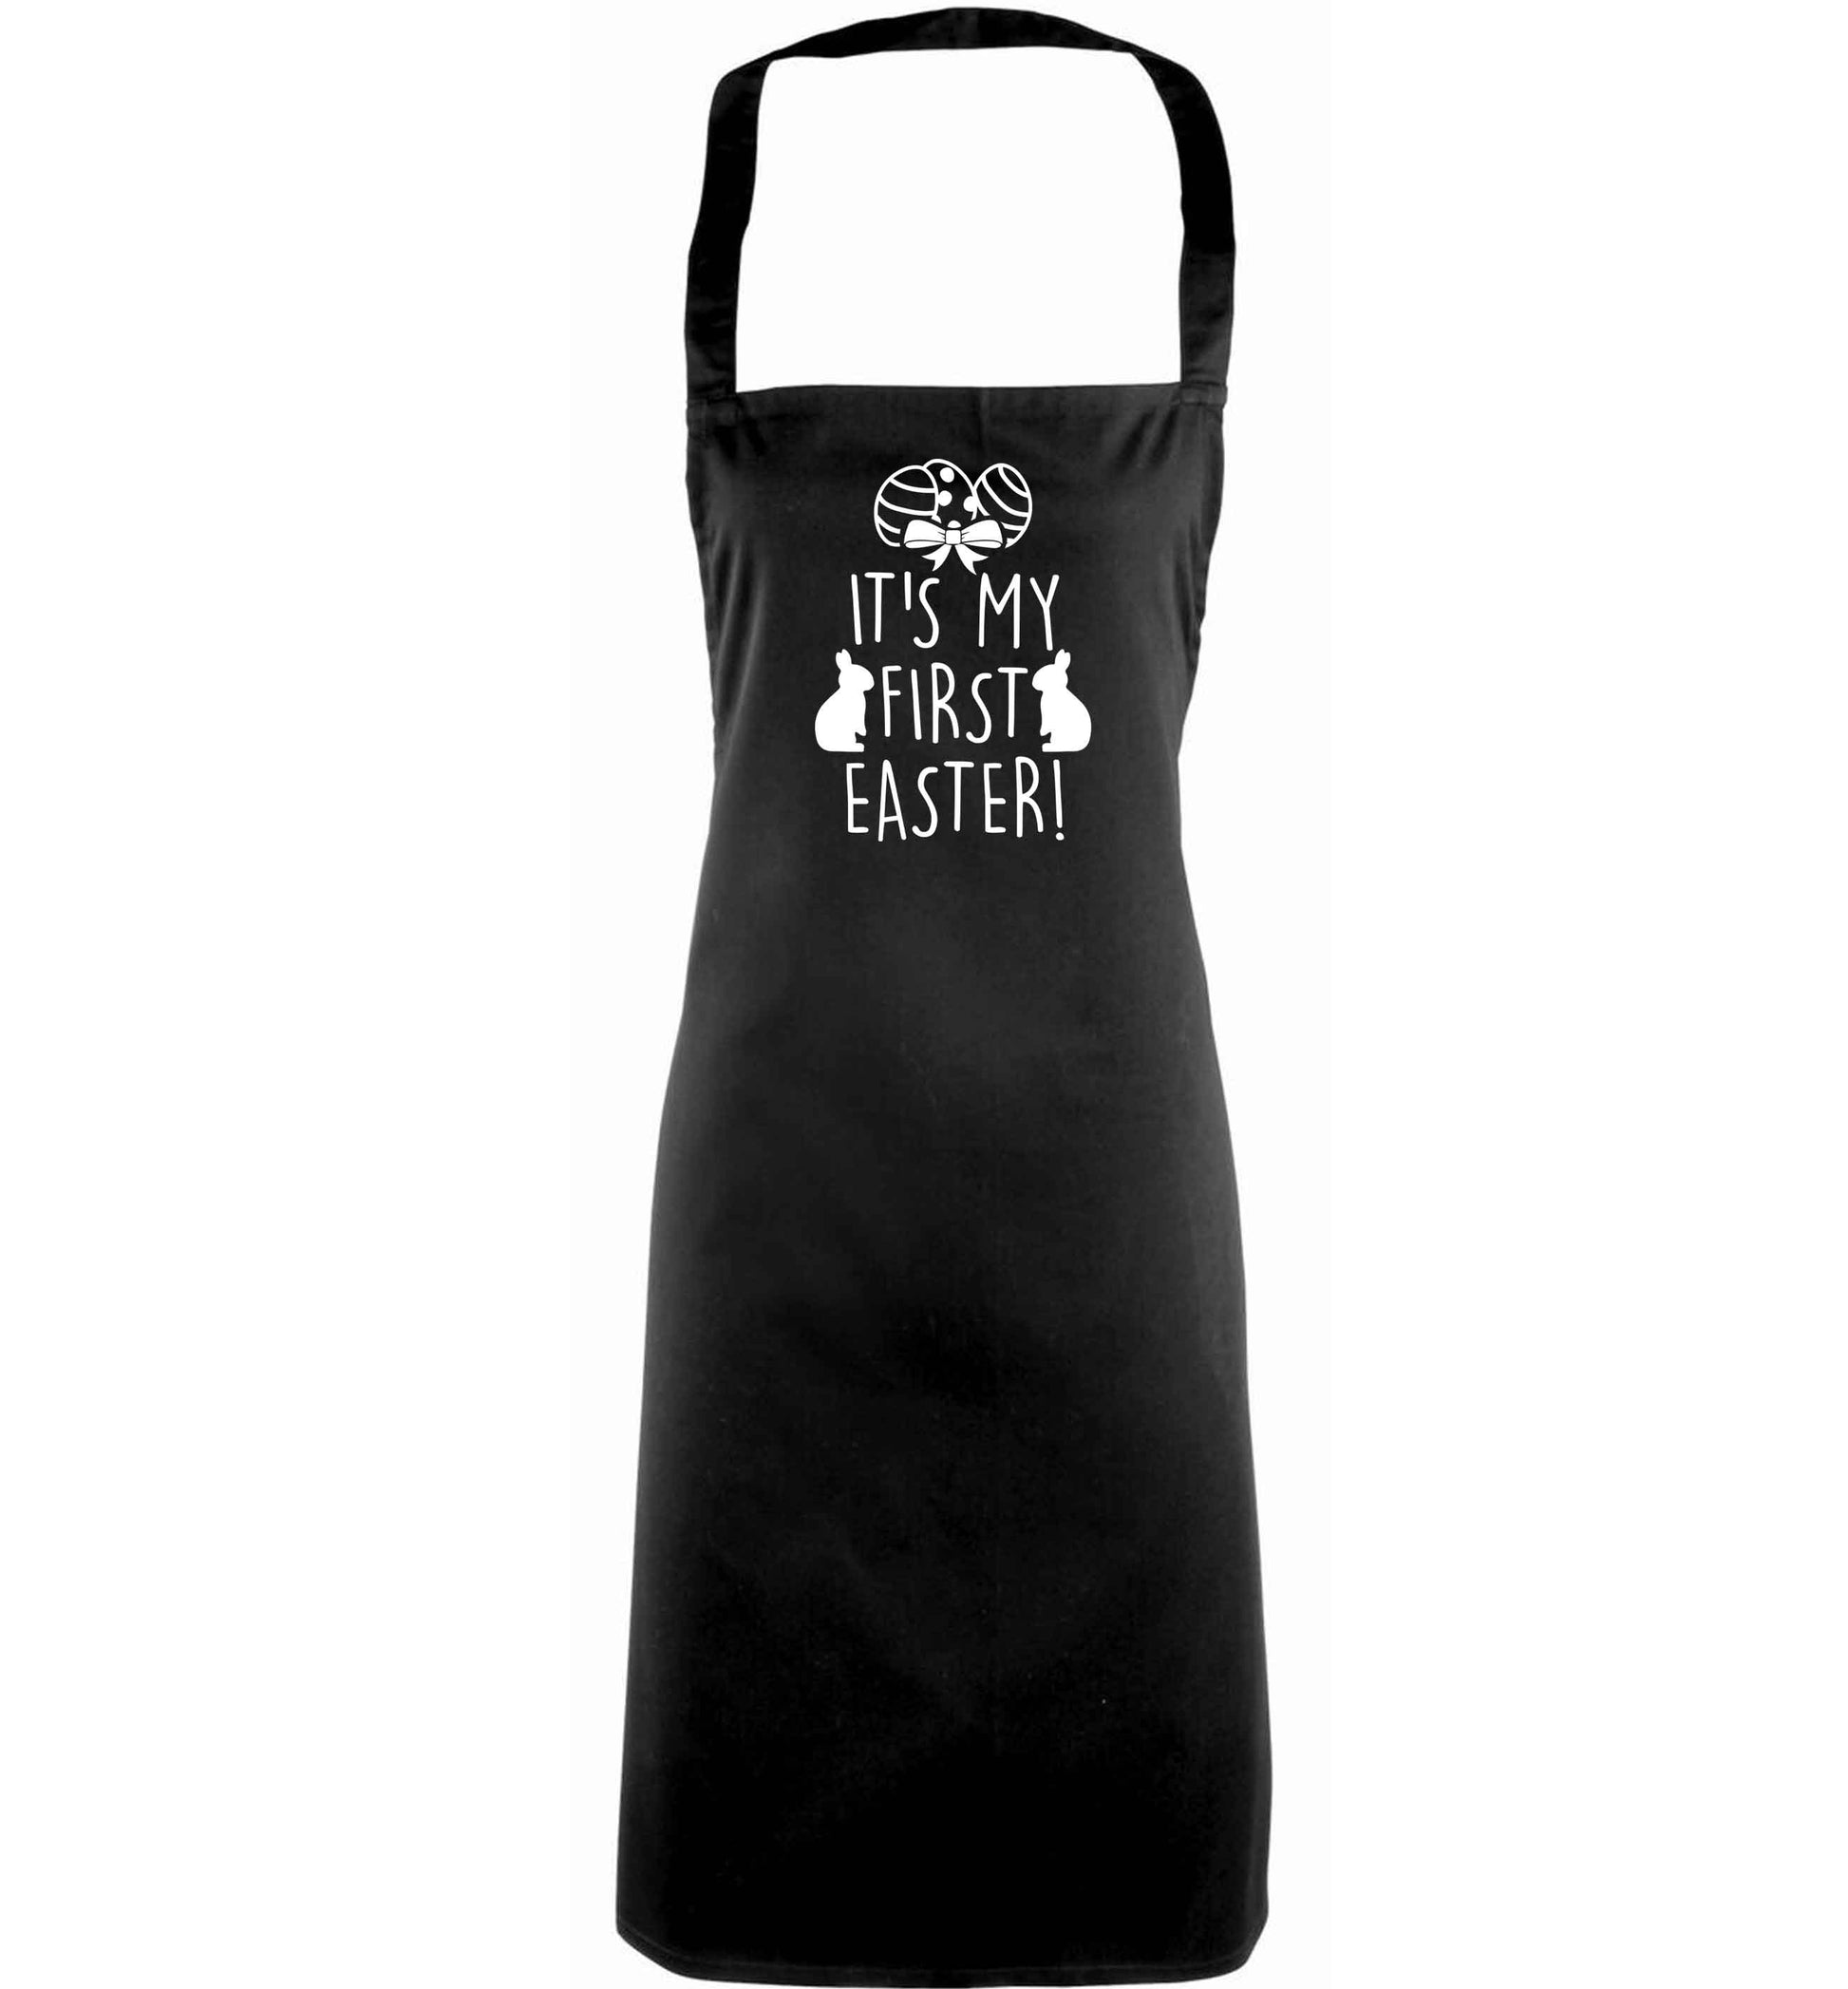 It's my first Easter adults black apron